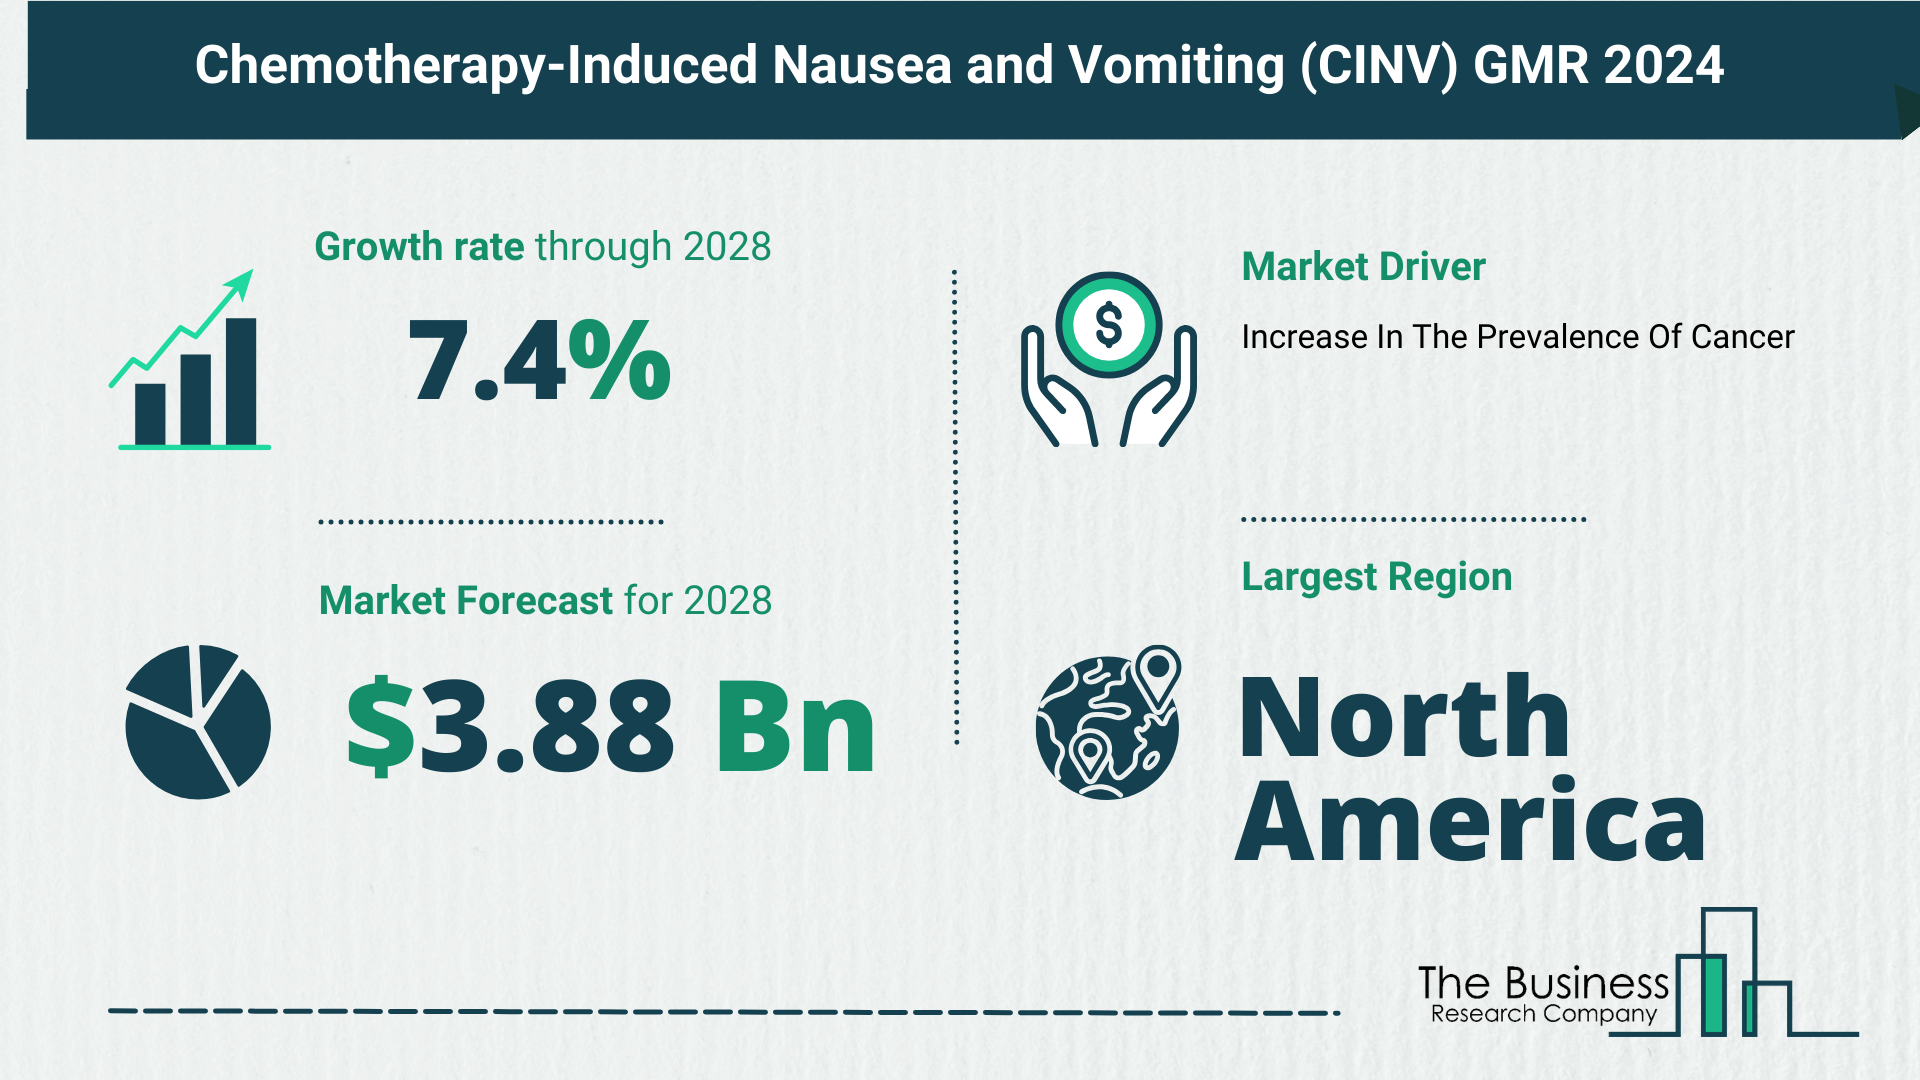 Global Chemotherapy-Induced Nausea and Vomiting (CINV) Market